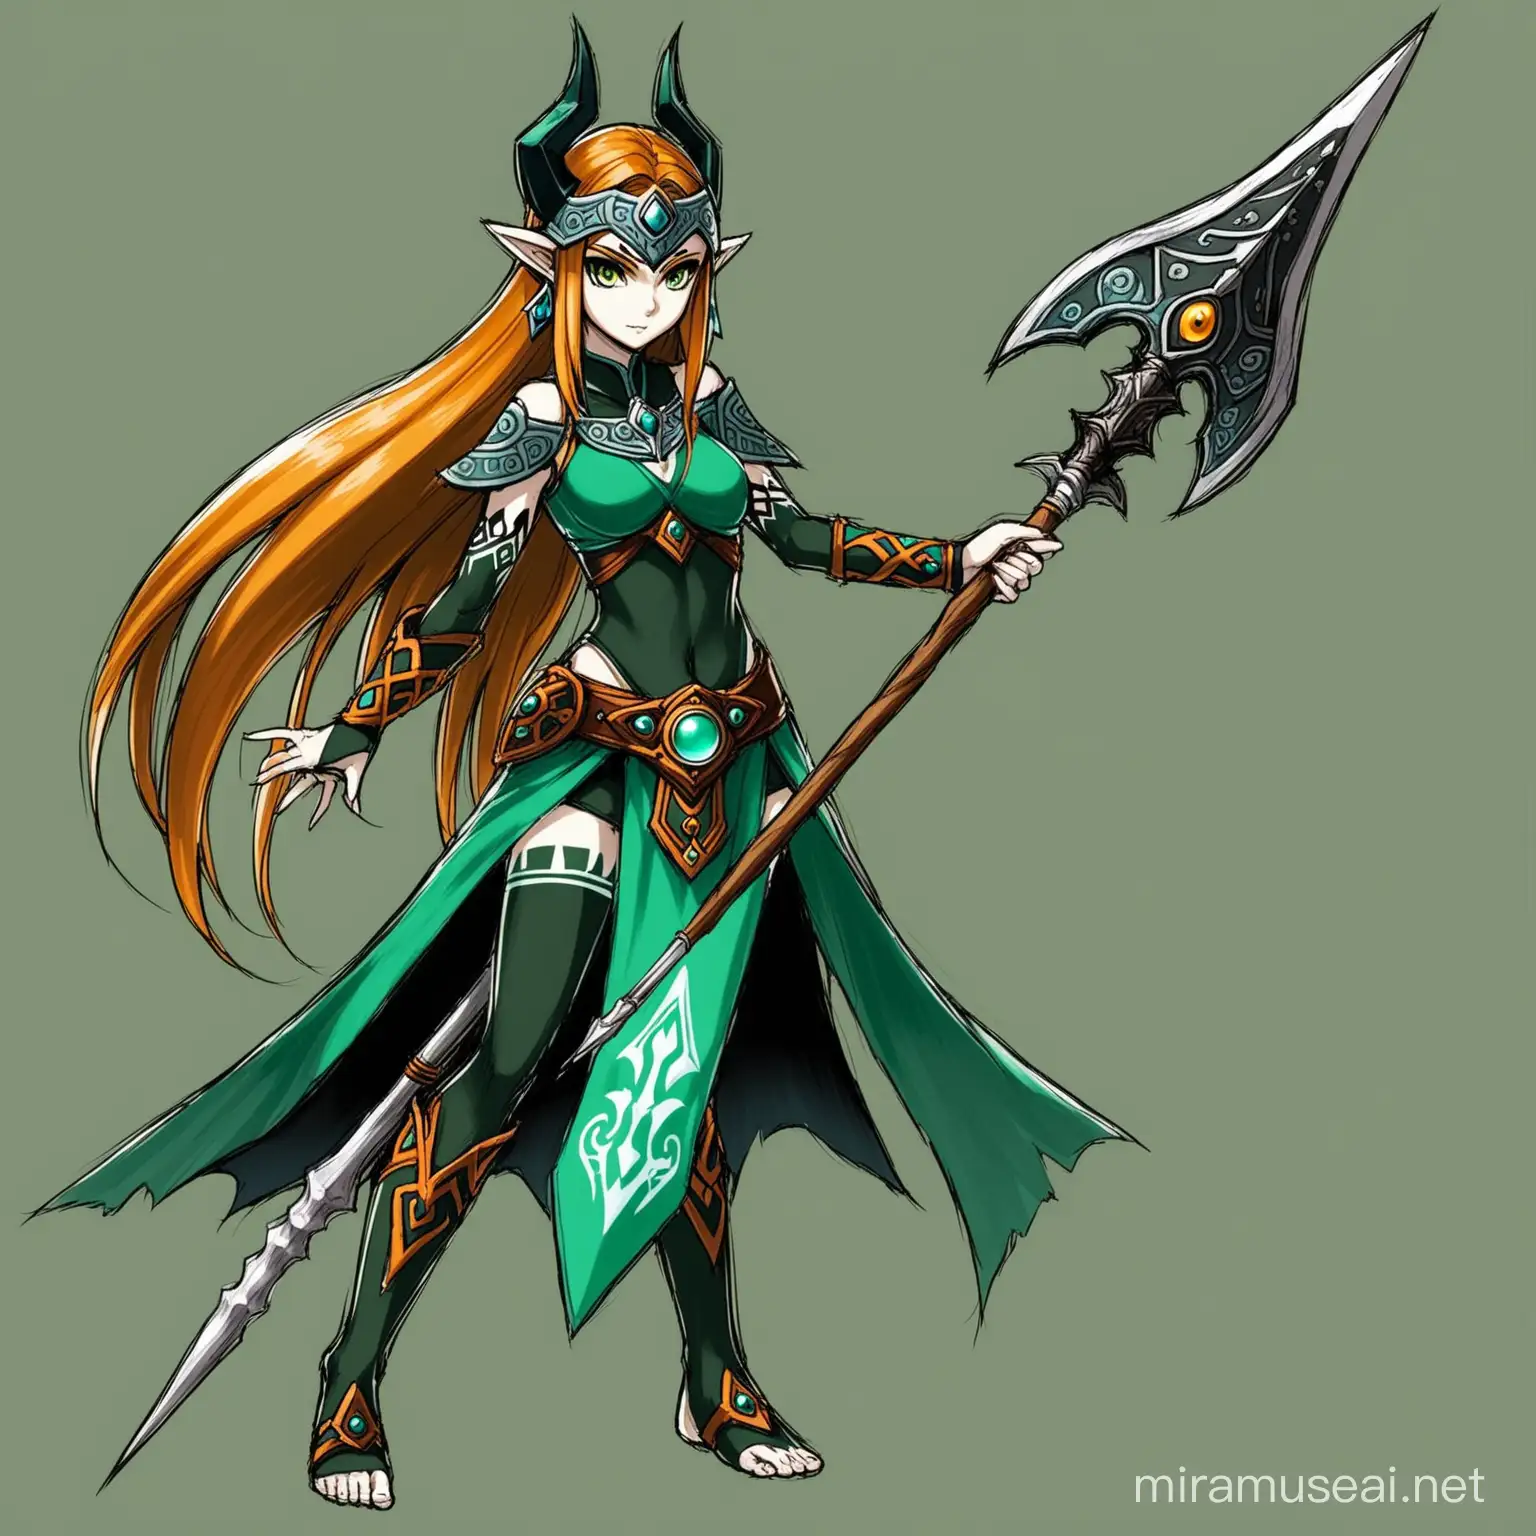 Make a drawing of human Midna from Zelda Twilight Princess. She holds a halberd on her shoulder and cast a spell with her other hand.